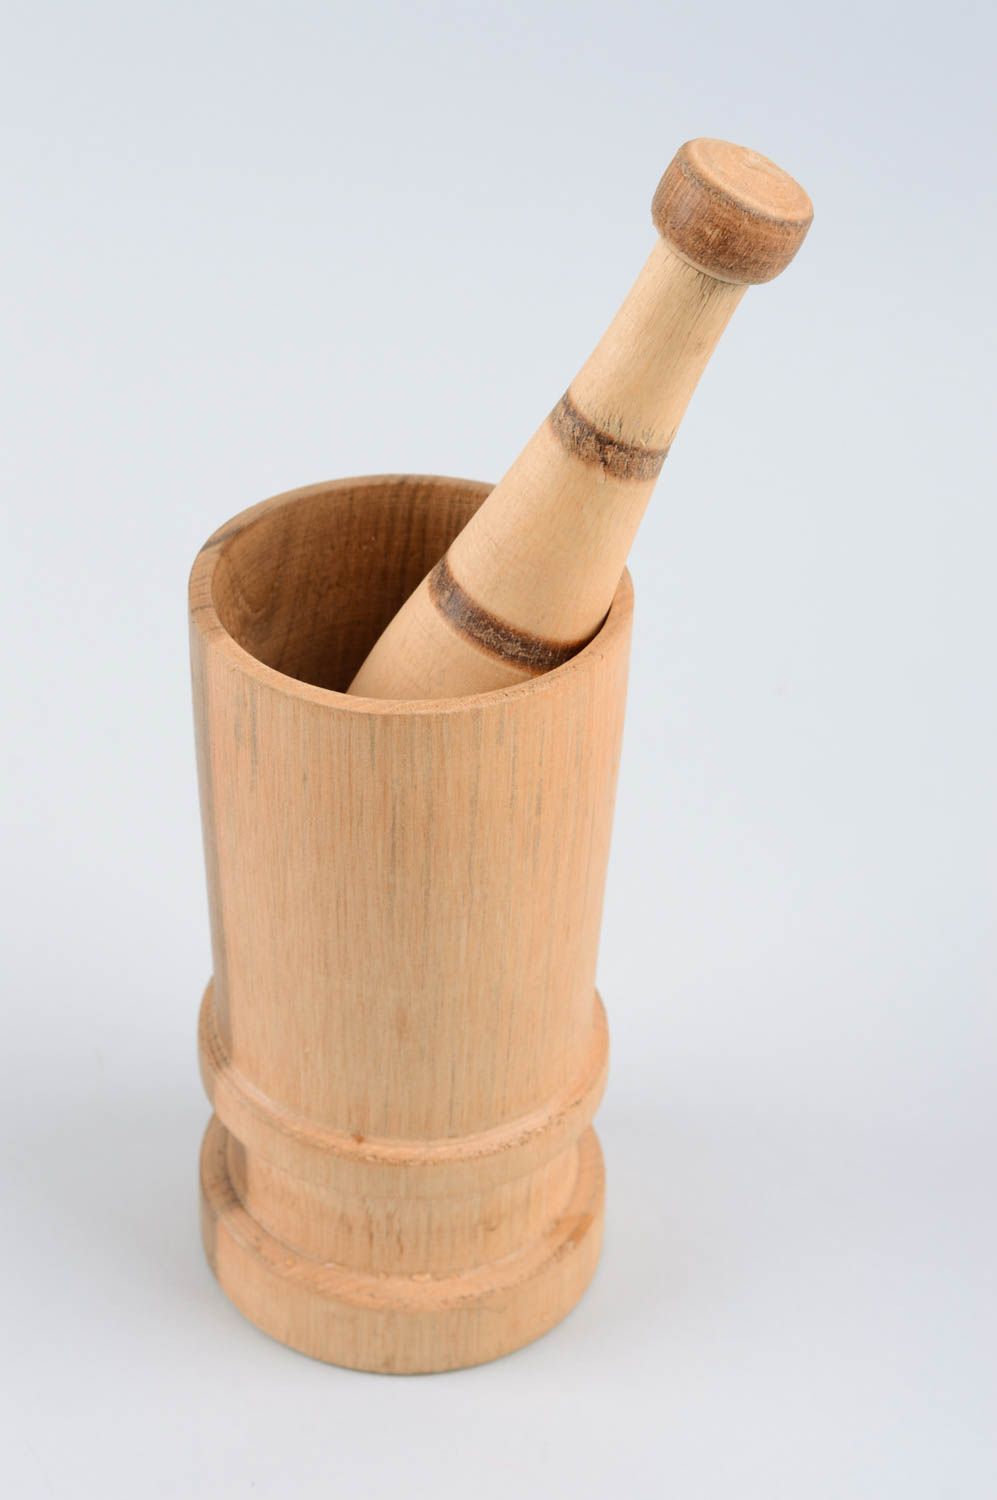 Handmade wooden mortar homemade mortar and pestle wooden kitchenware eco gifts photo 3